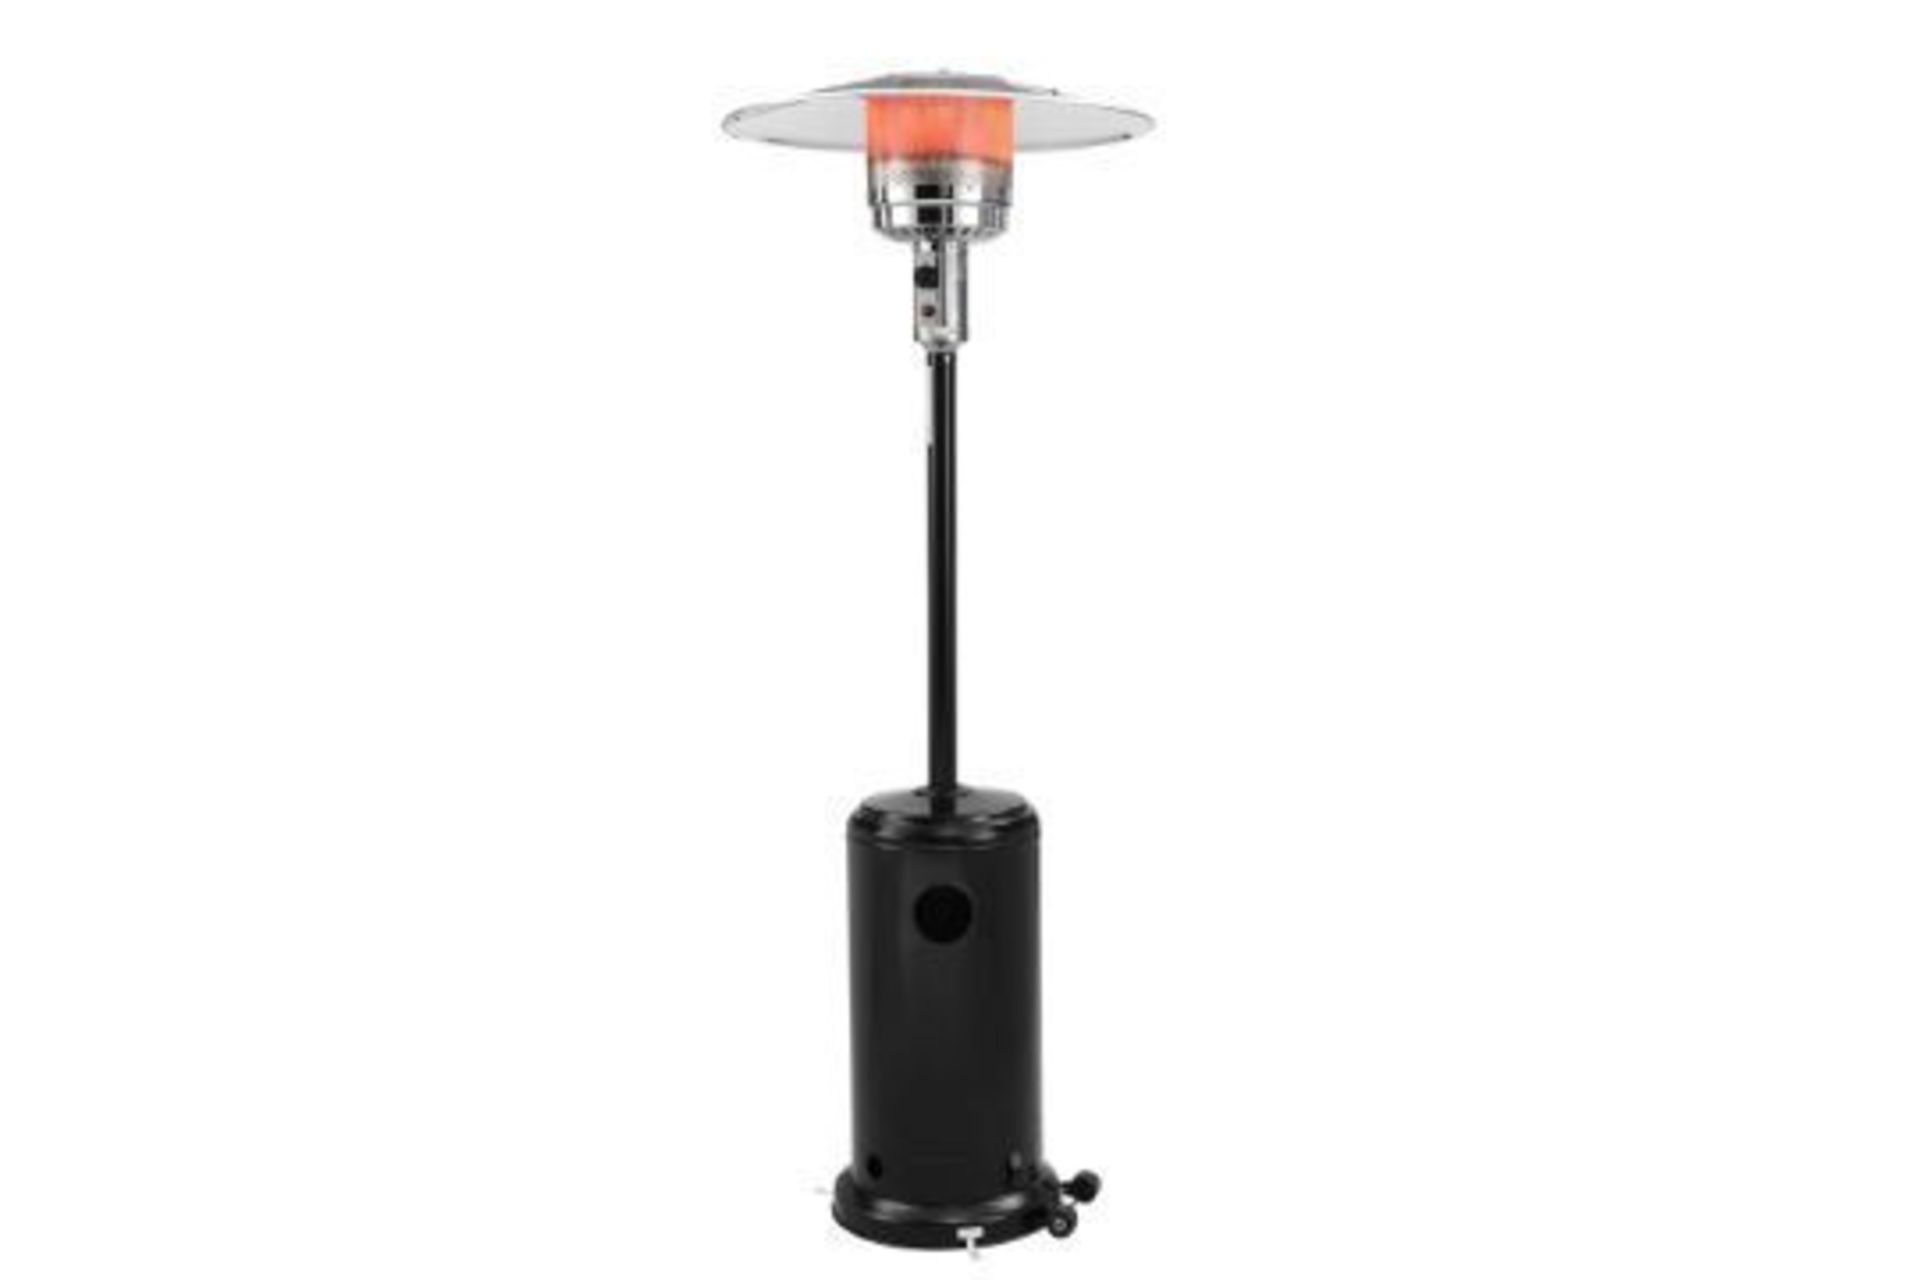 RRP £269 - NEW CHELSEA GARDEN COMPANY 2.2M MUSHROOM HEATER - This futuristic-looking heater adds a - Image 2 of 3